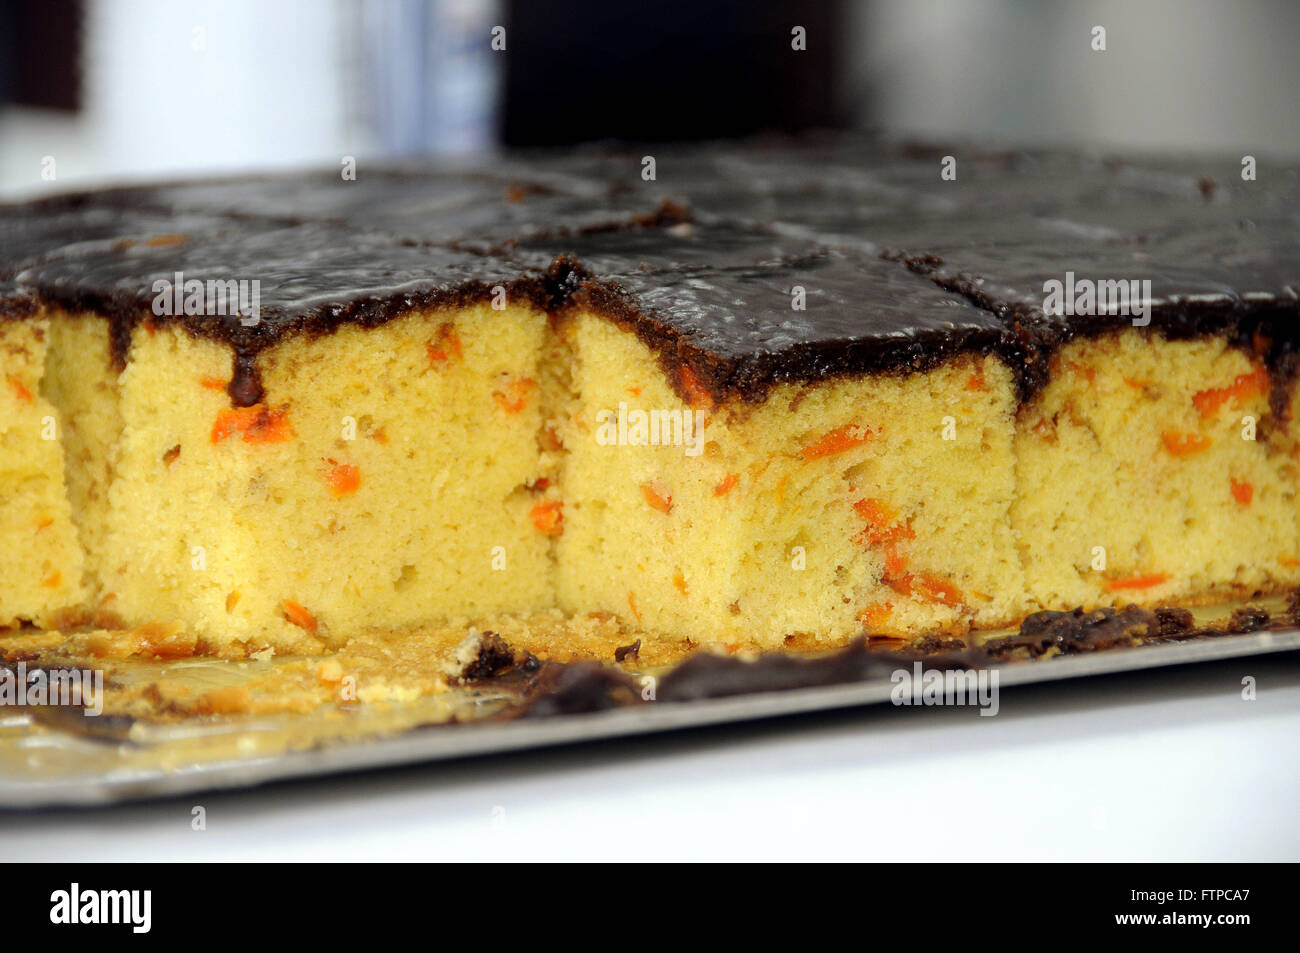 Carrot cake with chocolate icing Stock Photo